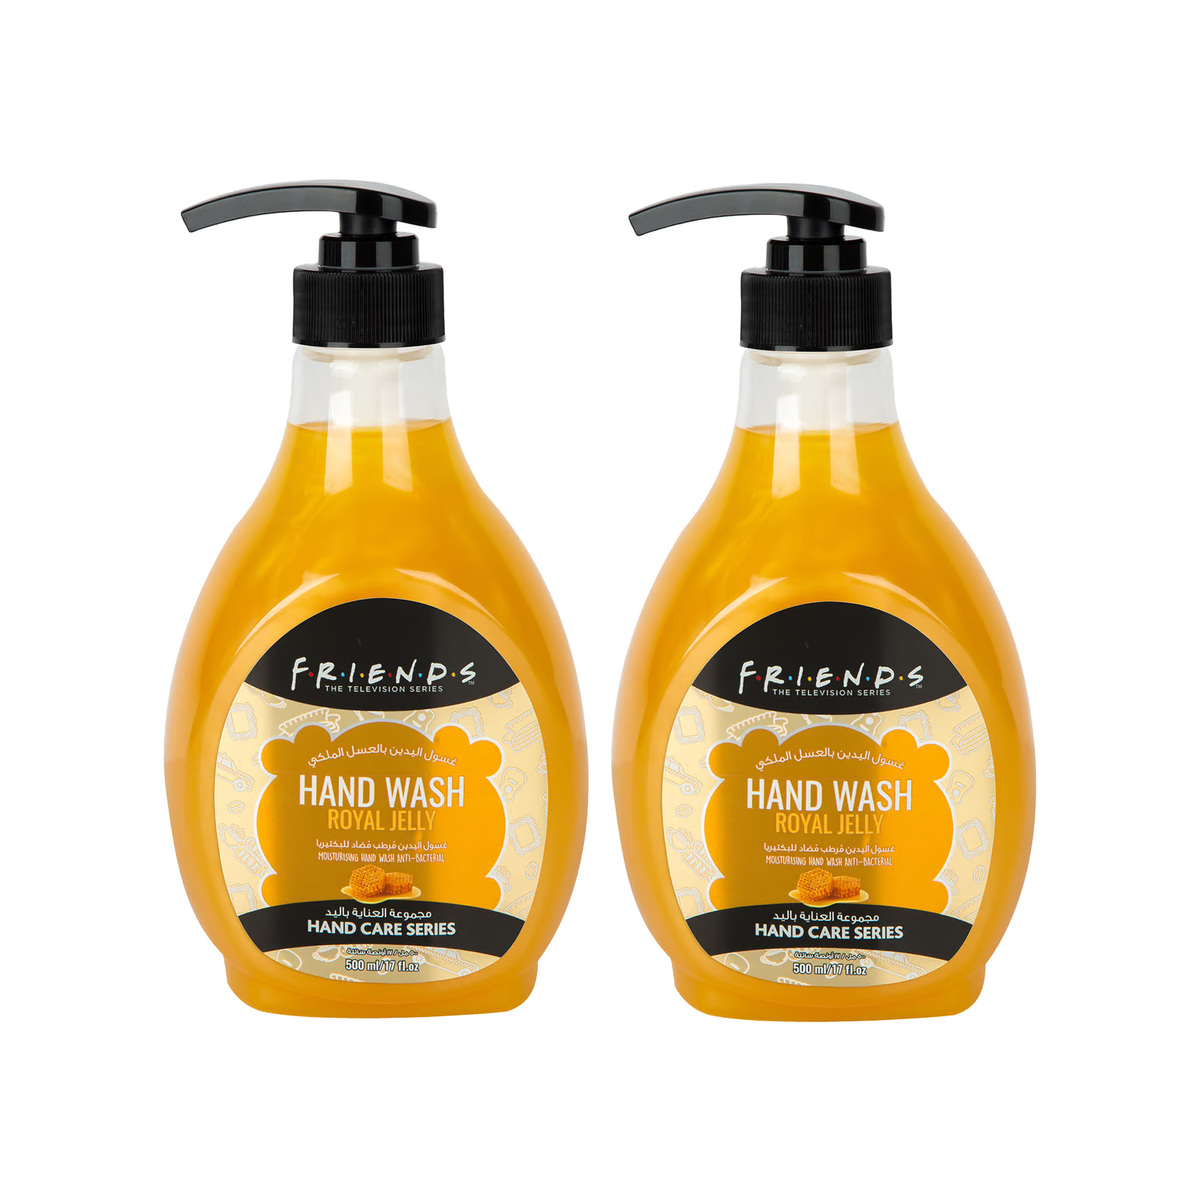 Friends Royal Jelly Antibacterial Hand Wash 2 x 500 ml